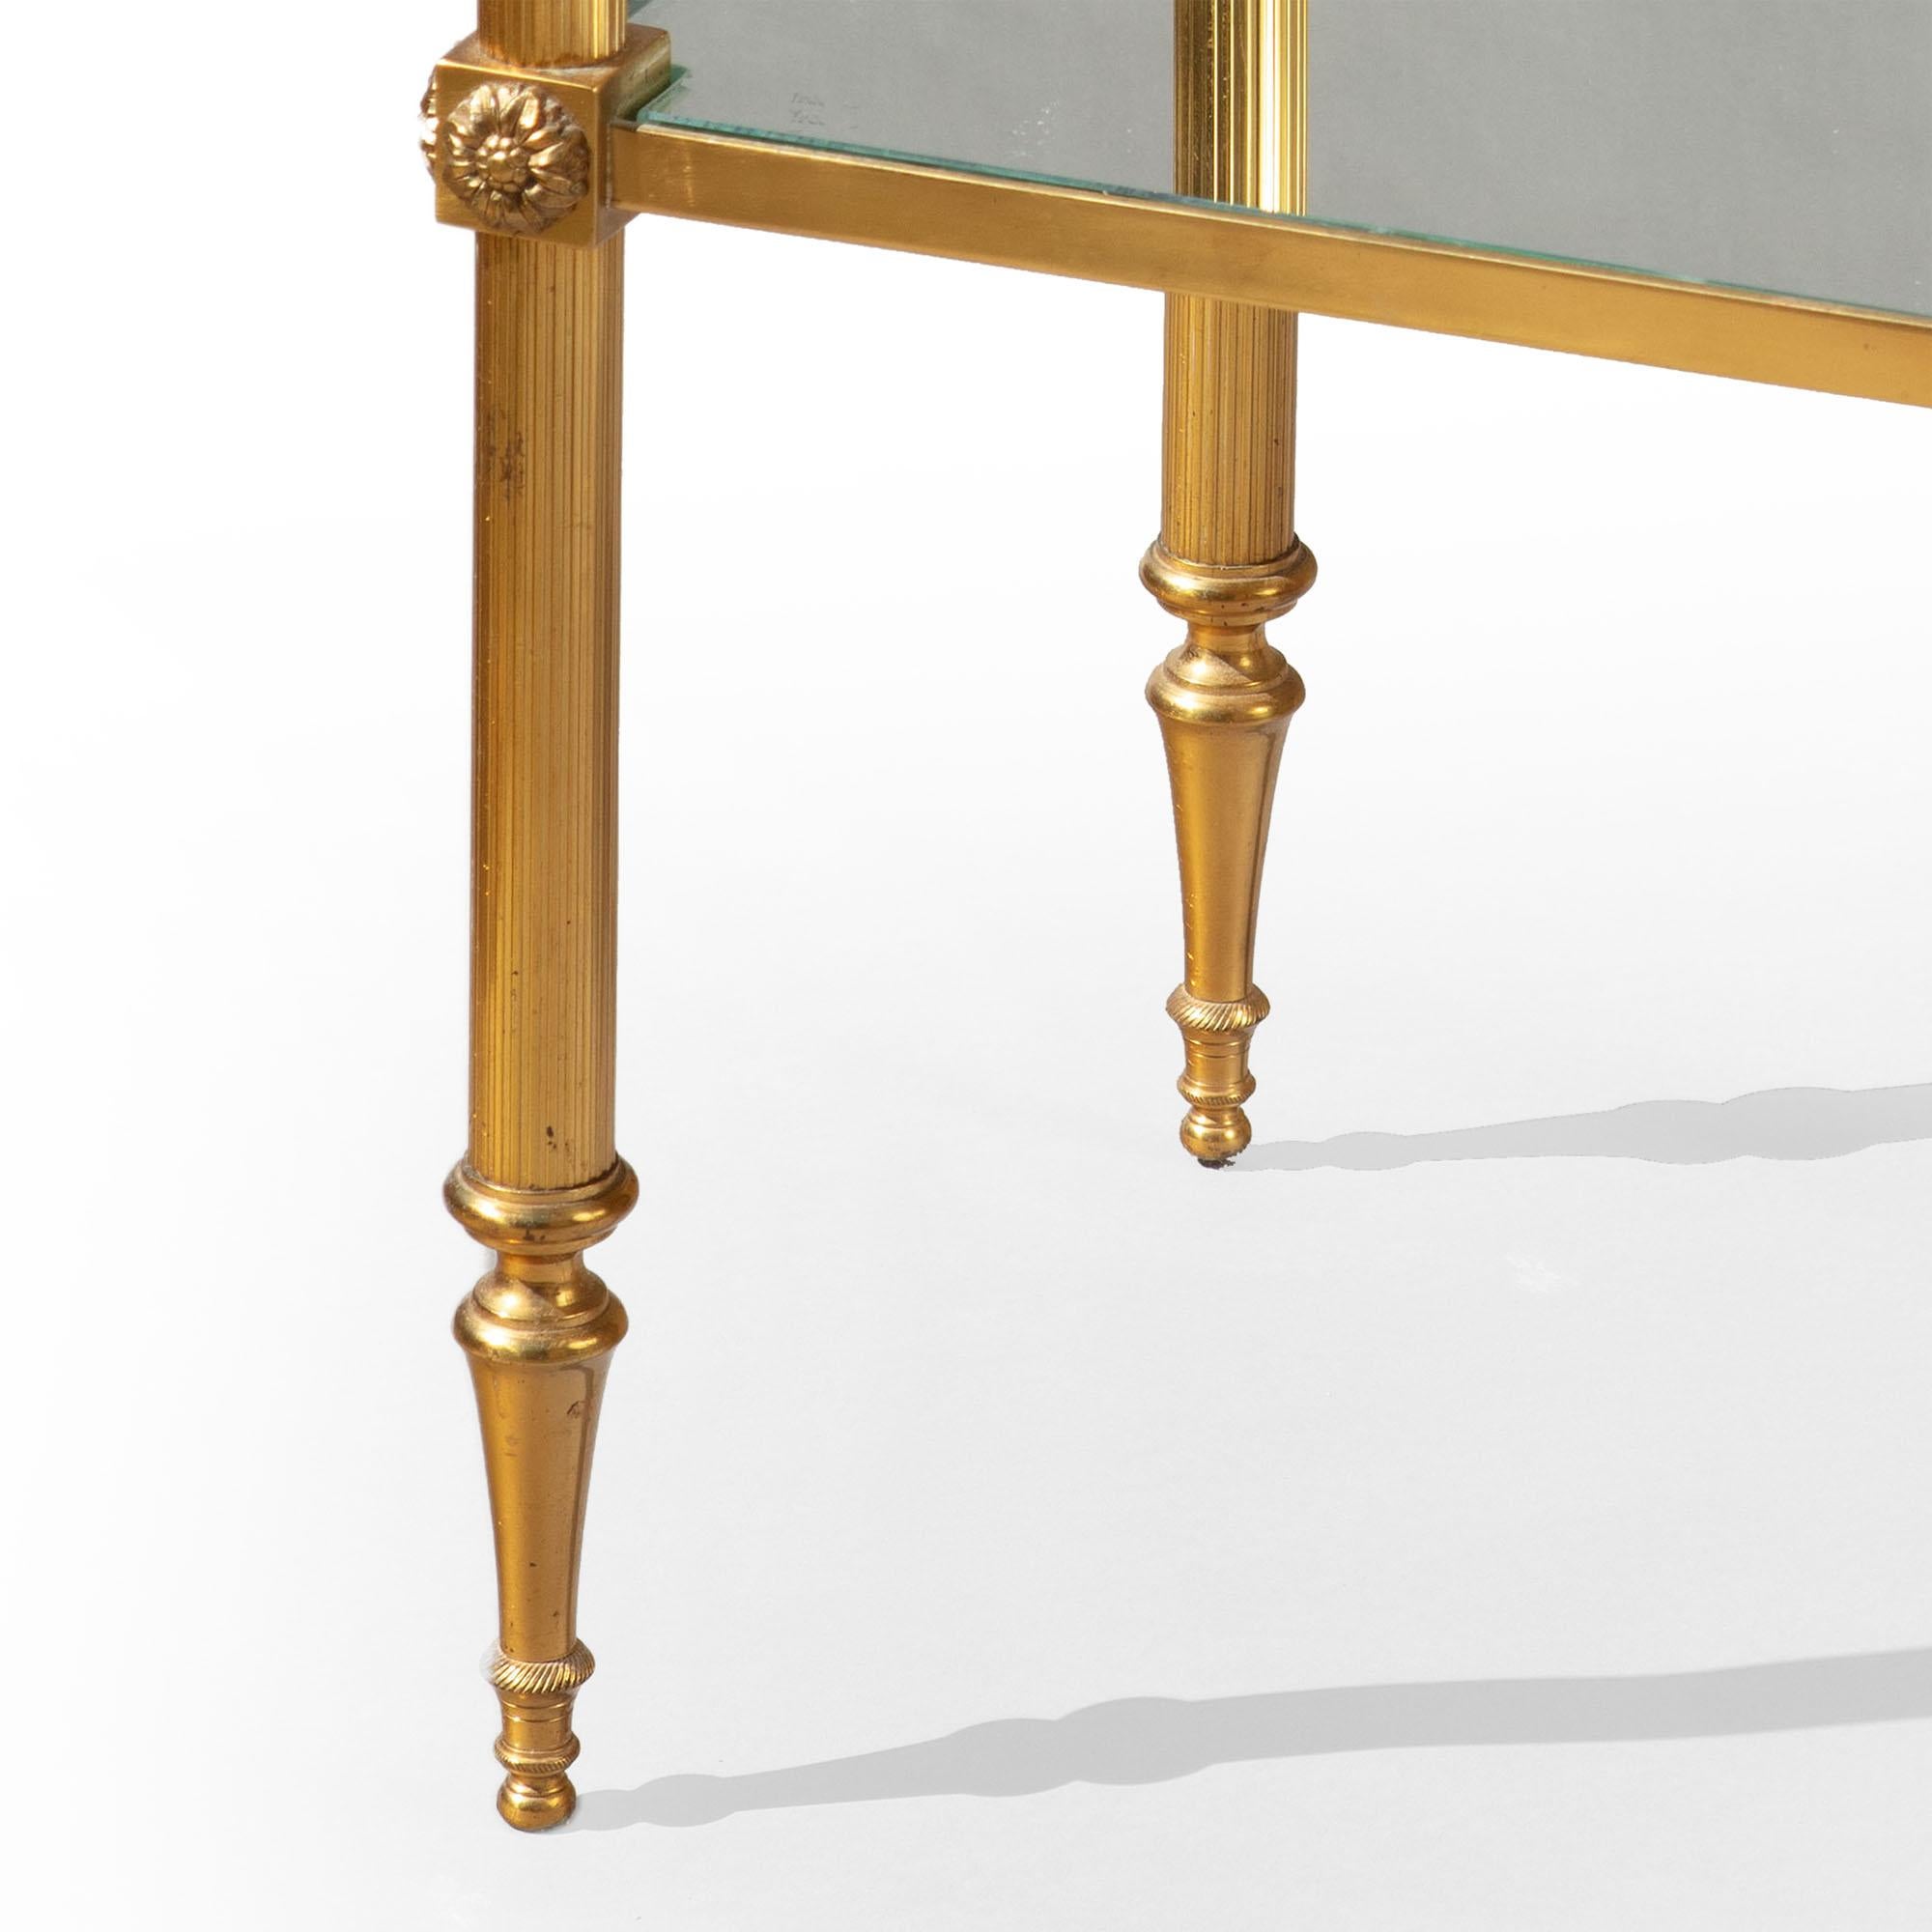 A pair of polished brass two-tier end tables with acorn finials, reeded legs and toupie feet, the two tiers with mirrored shelves.

France, circa 1970

Dimensions: Height 29.5